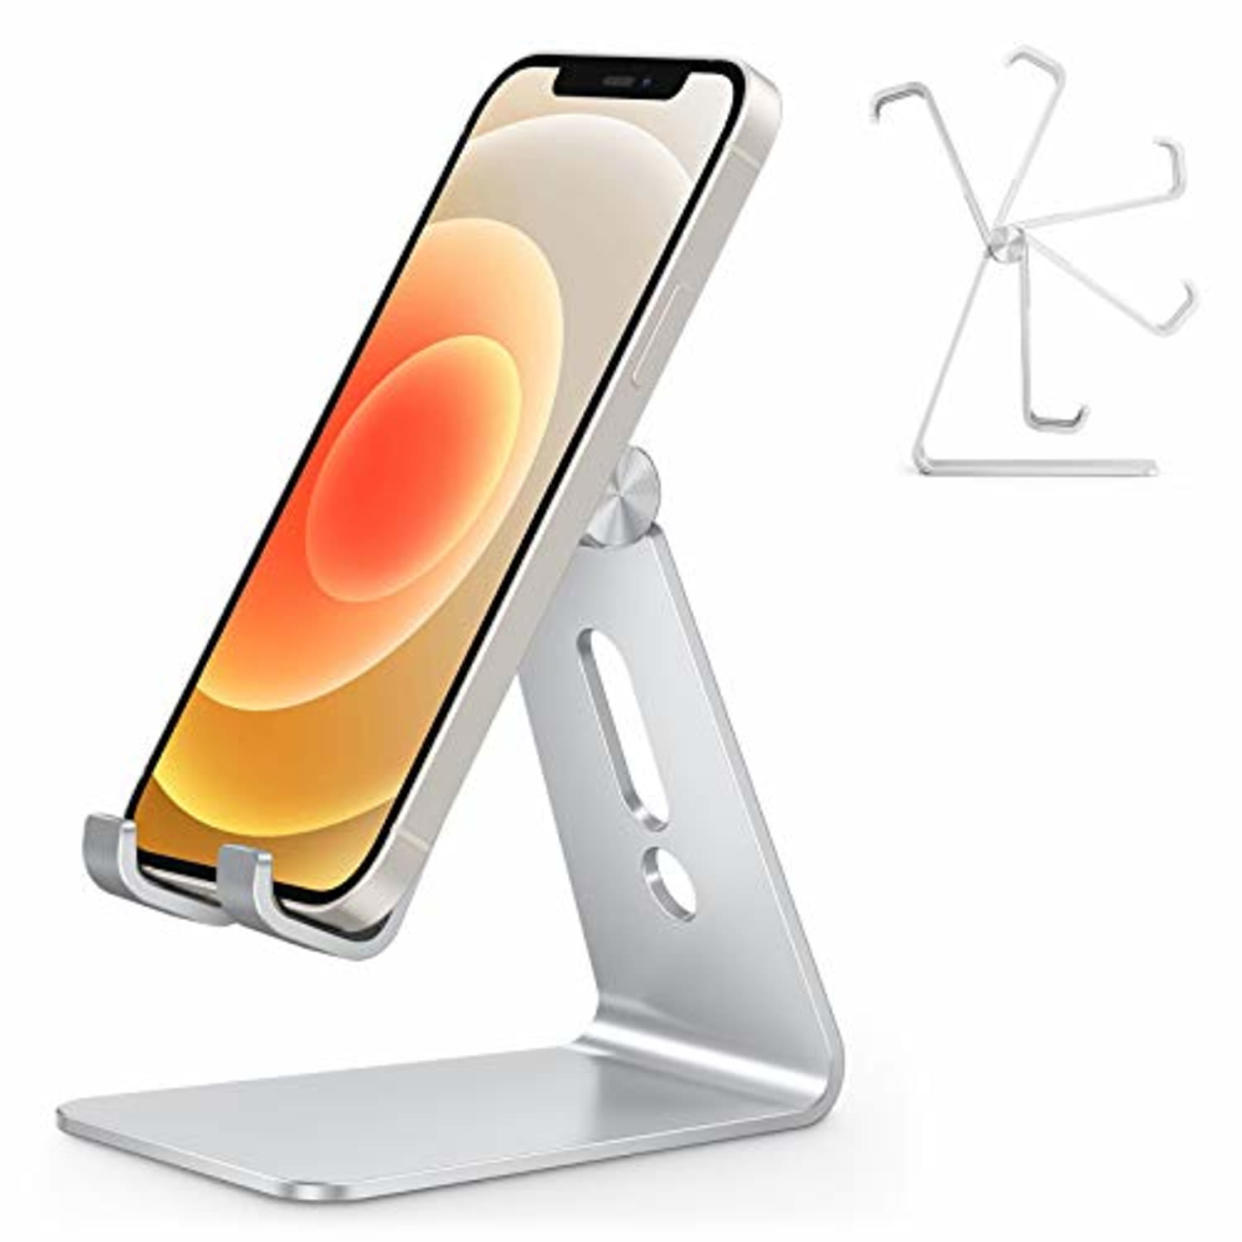 OMOTON Adjustable Cell Phone Stand, C2 Aluminum Desktop Phone Dock Holder Compatible with iPhone 15 14 13, SE, XR, 8 Plus 7 6, Samsung Galaxy, Google Pixel and More, Silver (AMAZON)